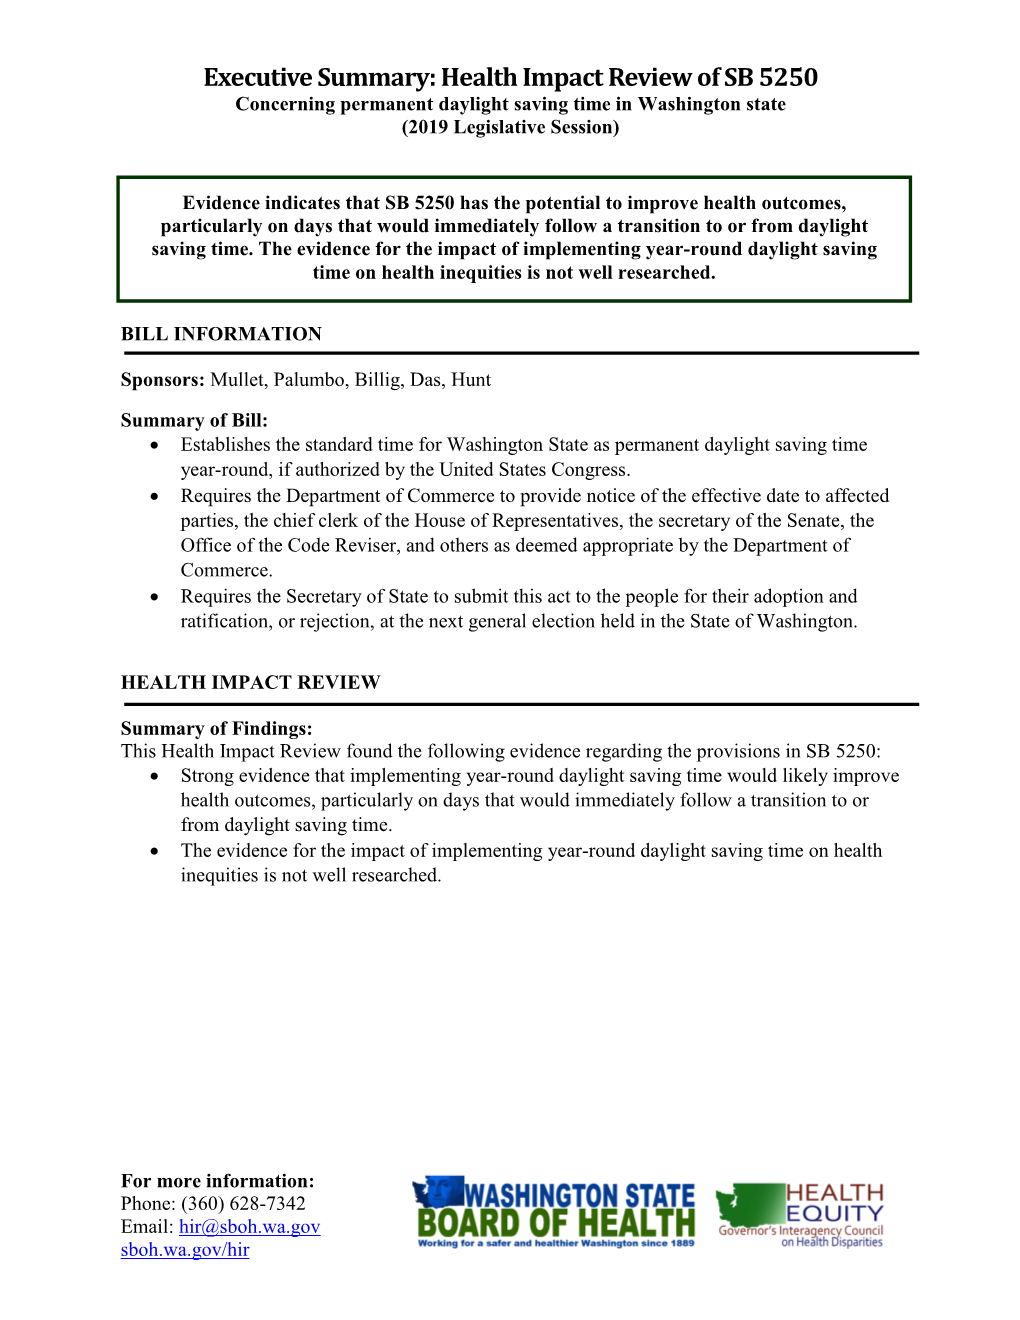 Health Impact Review of SB 5250 Concerning Permanent Daylight Saving Time in Washington State (2019 Legislative Session)